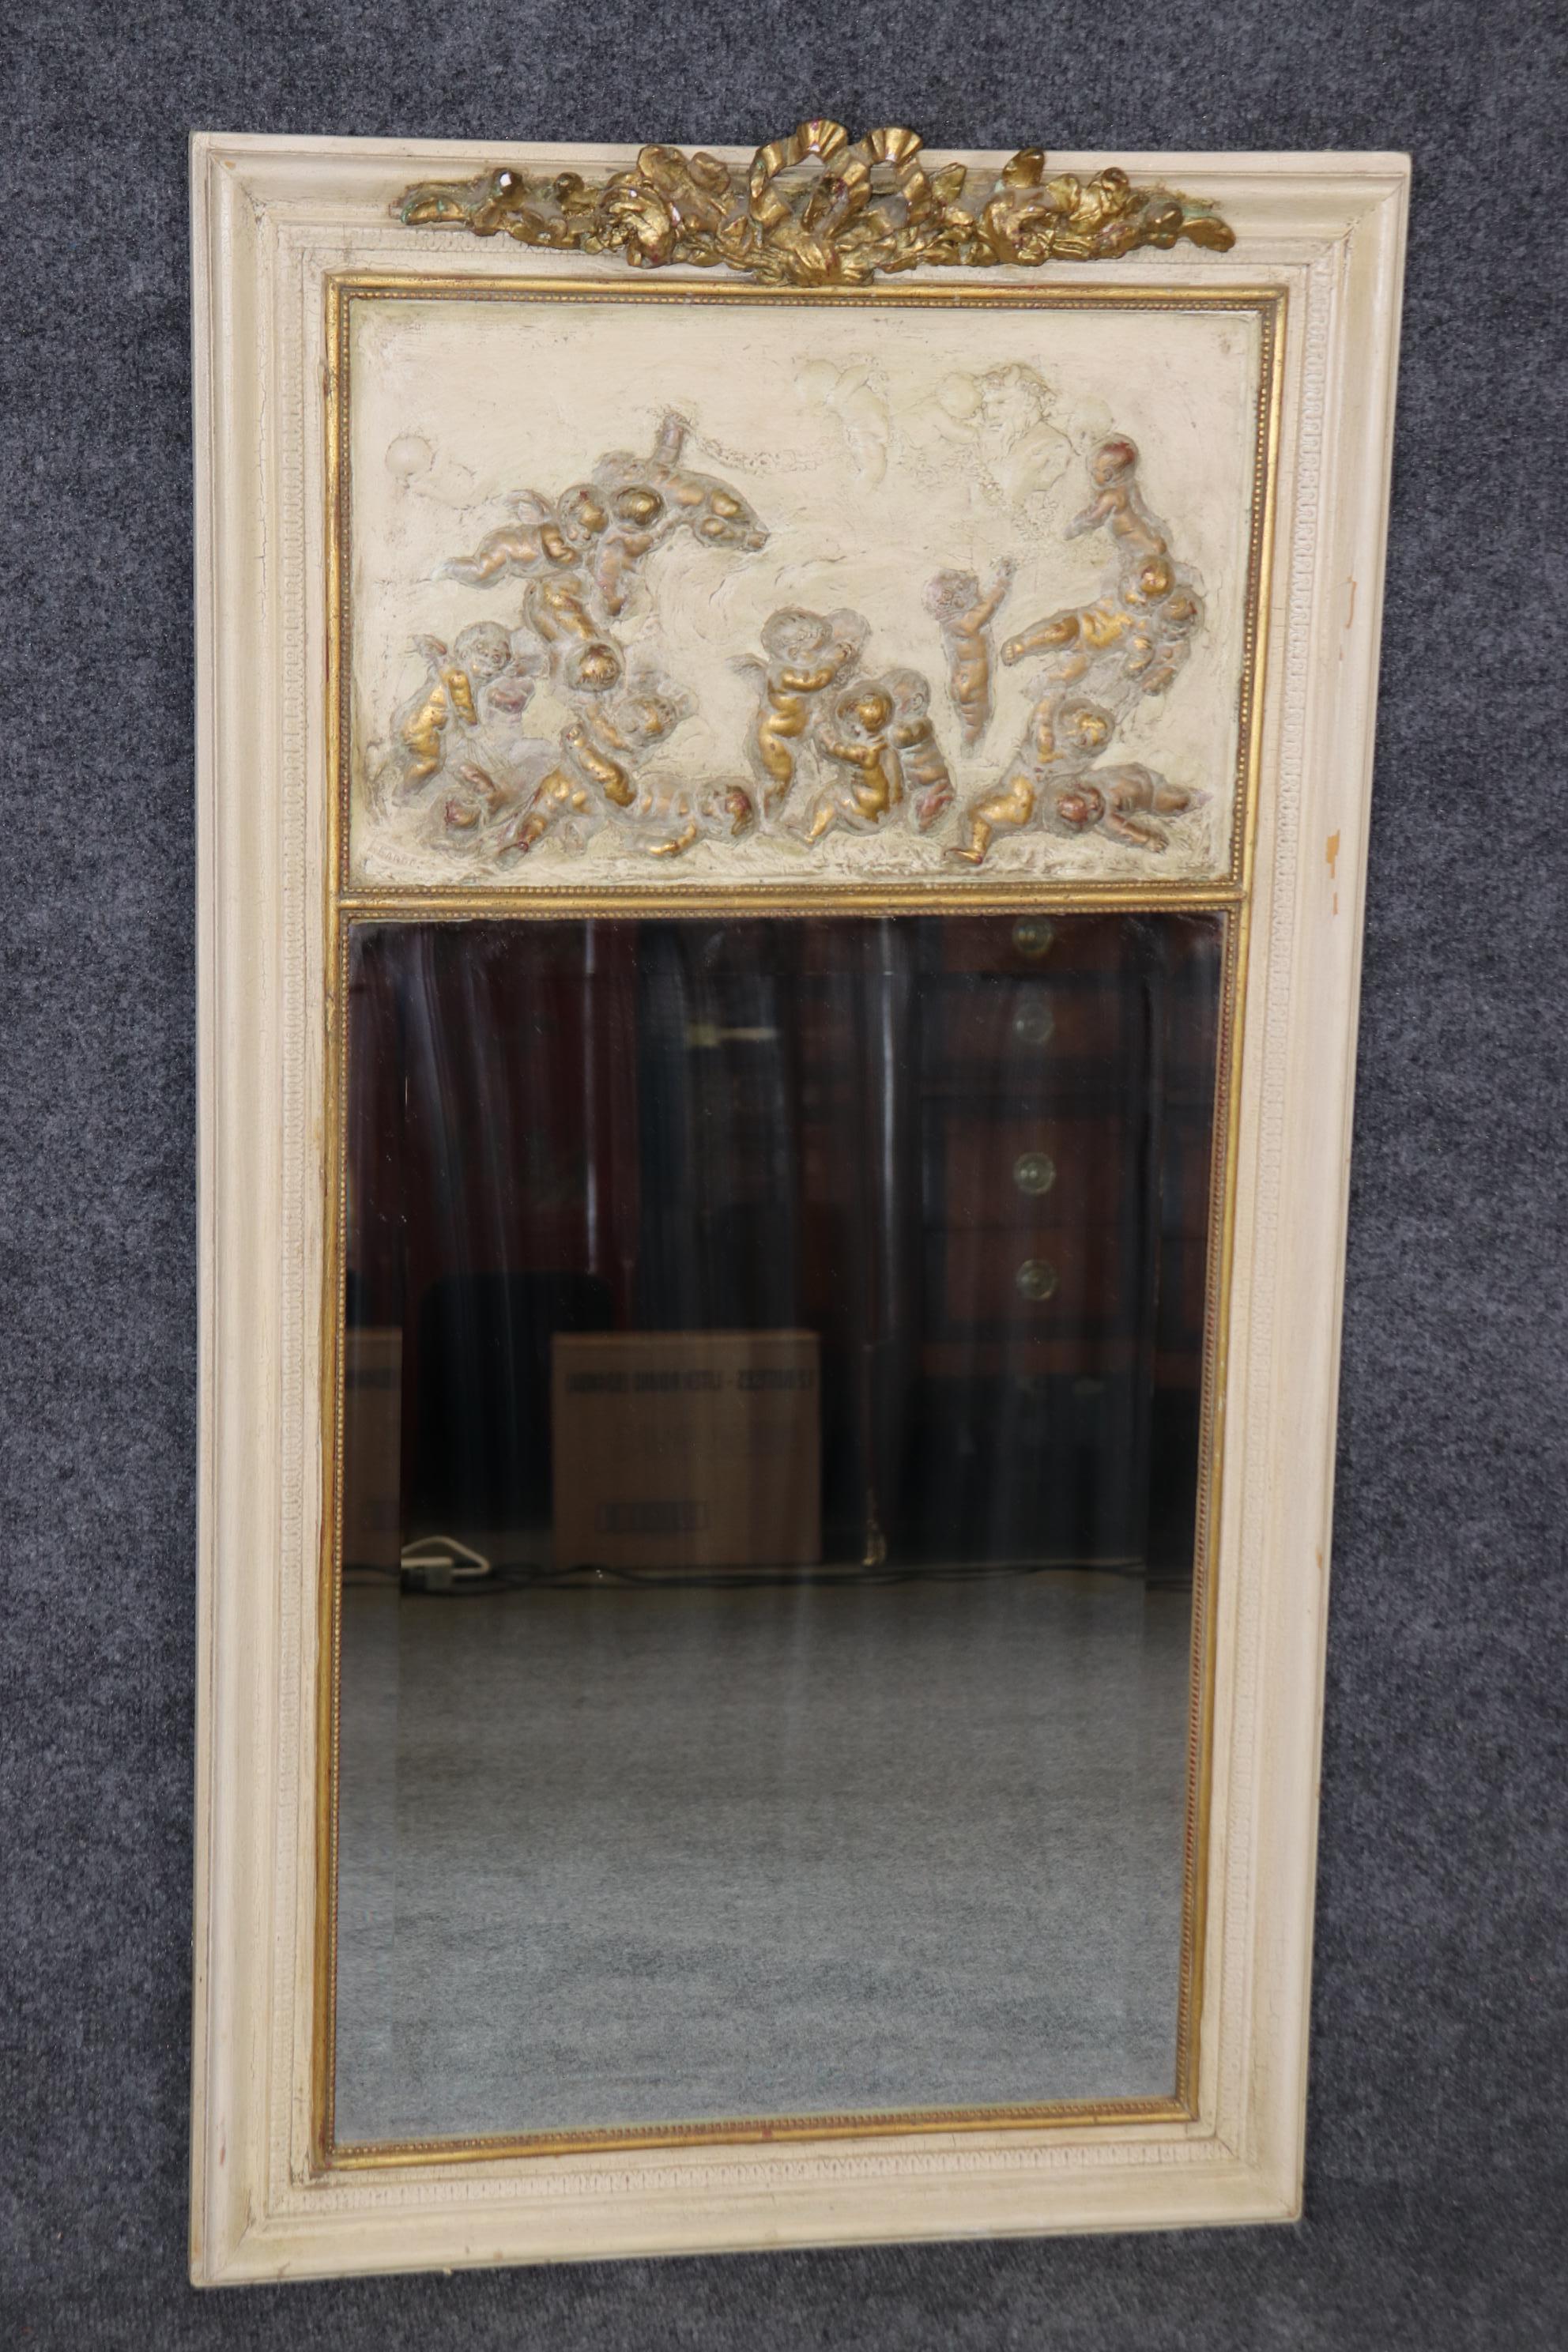 This is a gorgeous French 1900s era cherub or putti mirror with numerous cherubs playing together on a creme painted background with genuine gold leaf details. The mirror is made of pine which is unusual and shows a primitive yet very well-executed